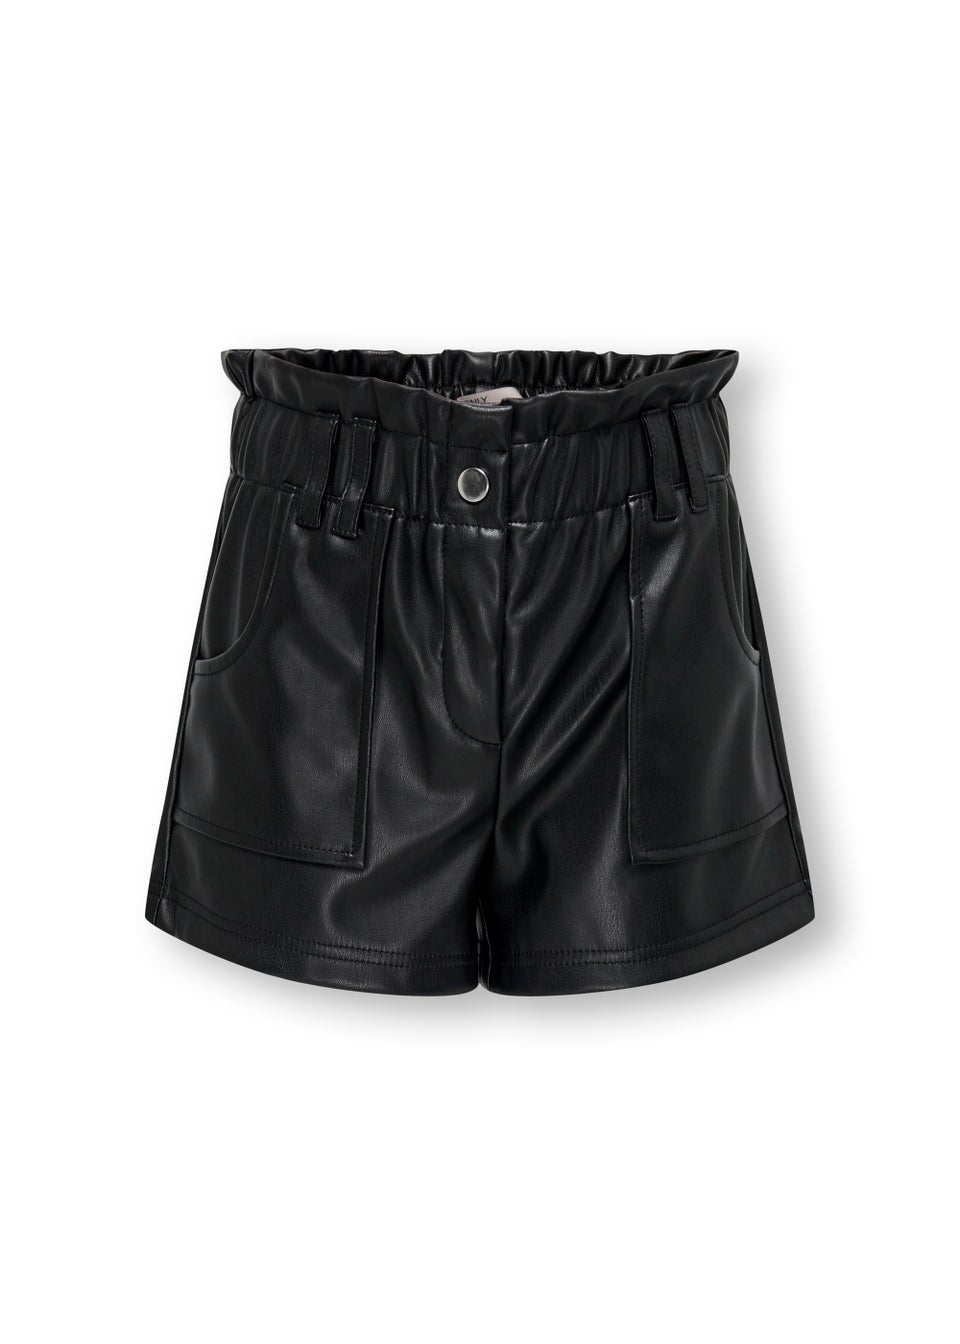 ONLY Kids Black Faux Leather Shorts (6-14yrs)